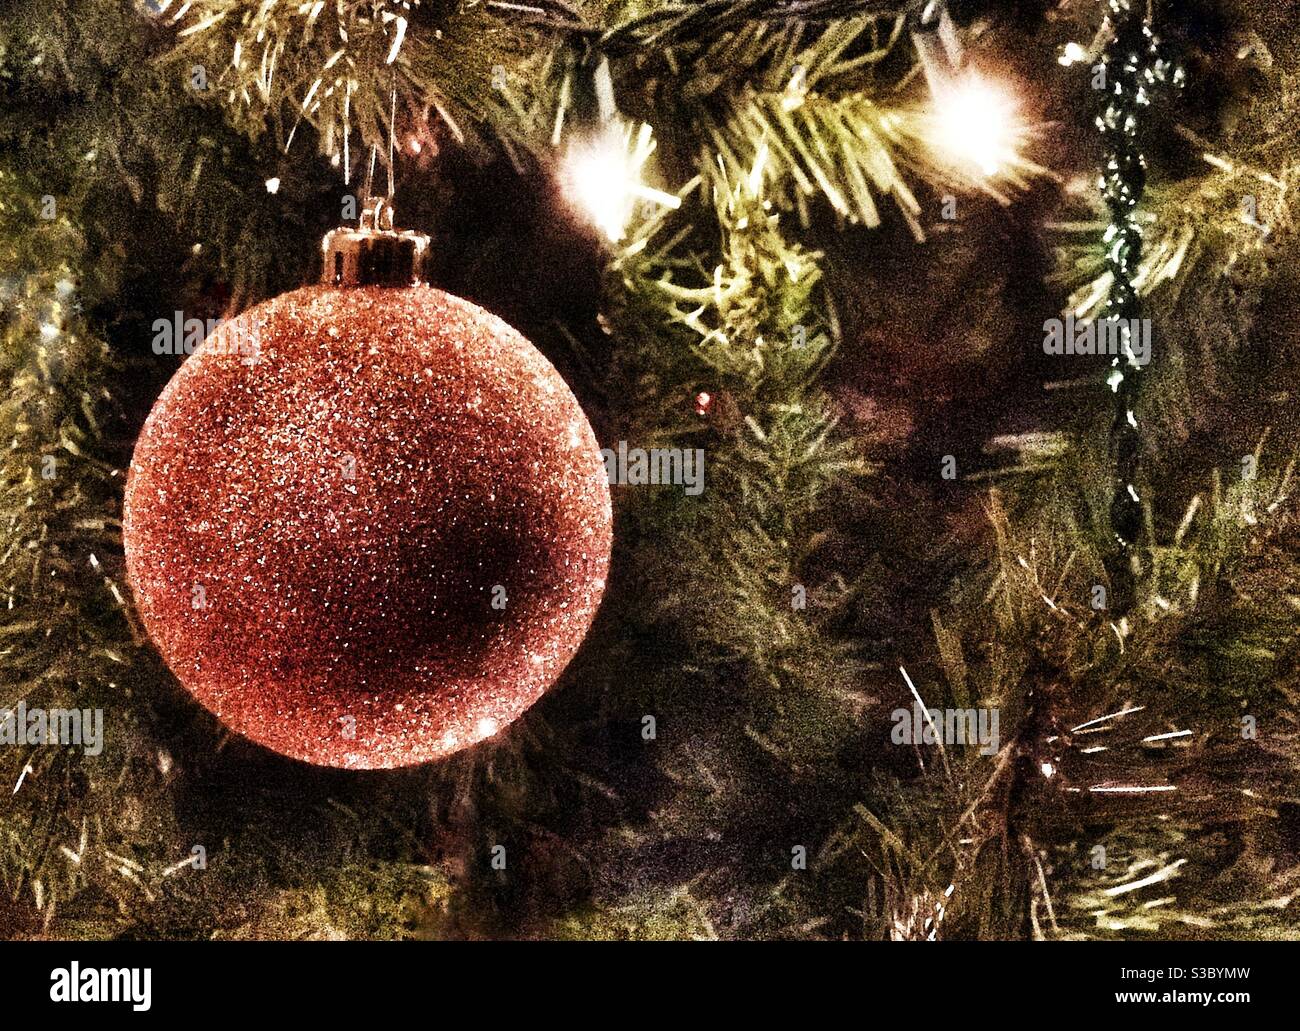 Christmas tree with lights and decorations Stock Photo